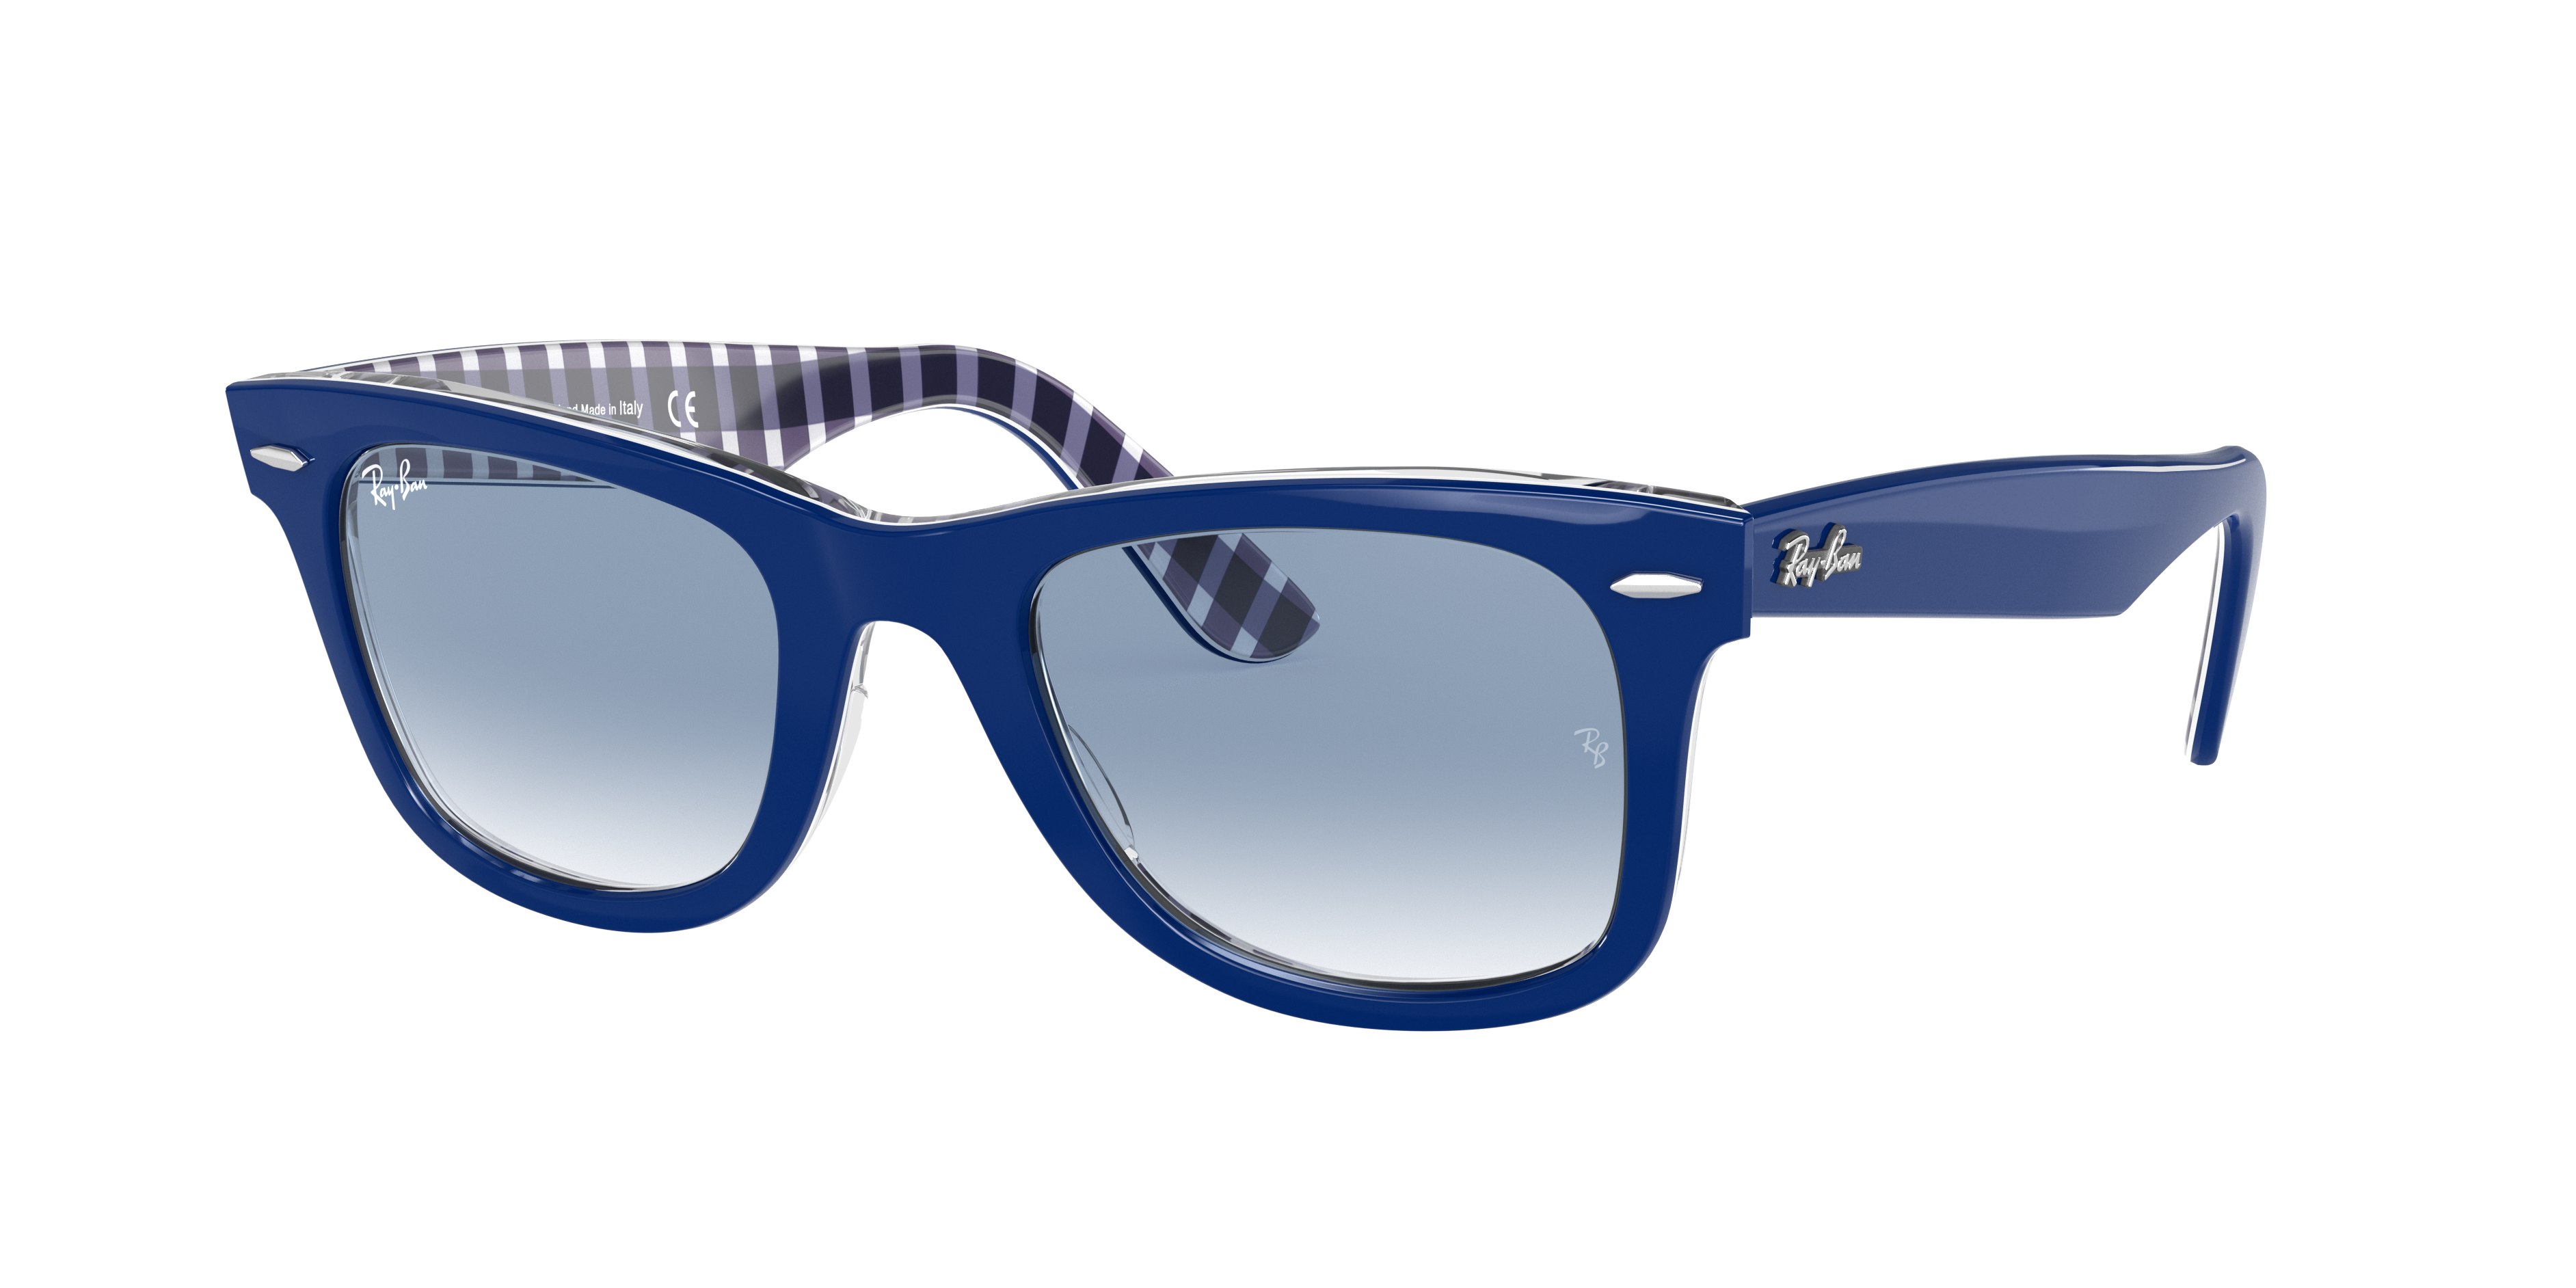 ray ban sunglasses with blue lenses